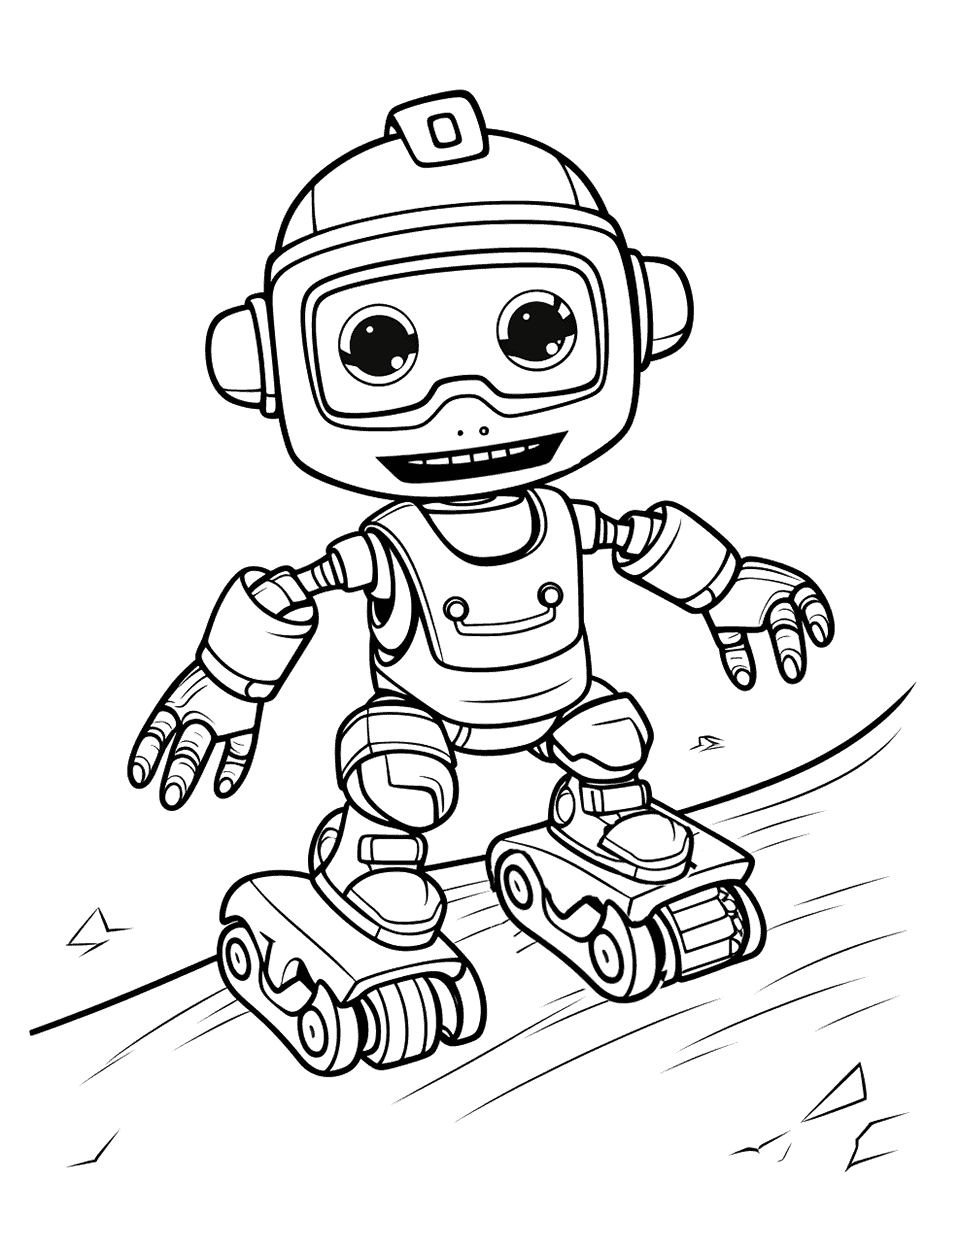 Snowskating Robot on a Slope Coloring Page - A robot snow-skating down a snowy hill.